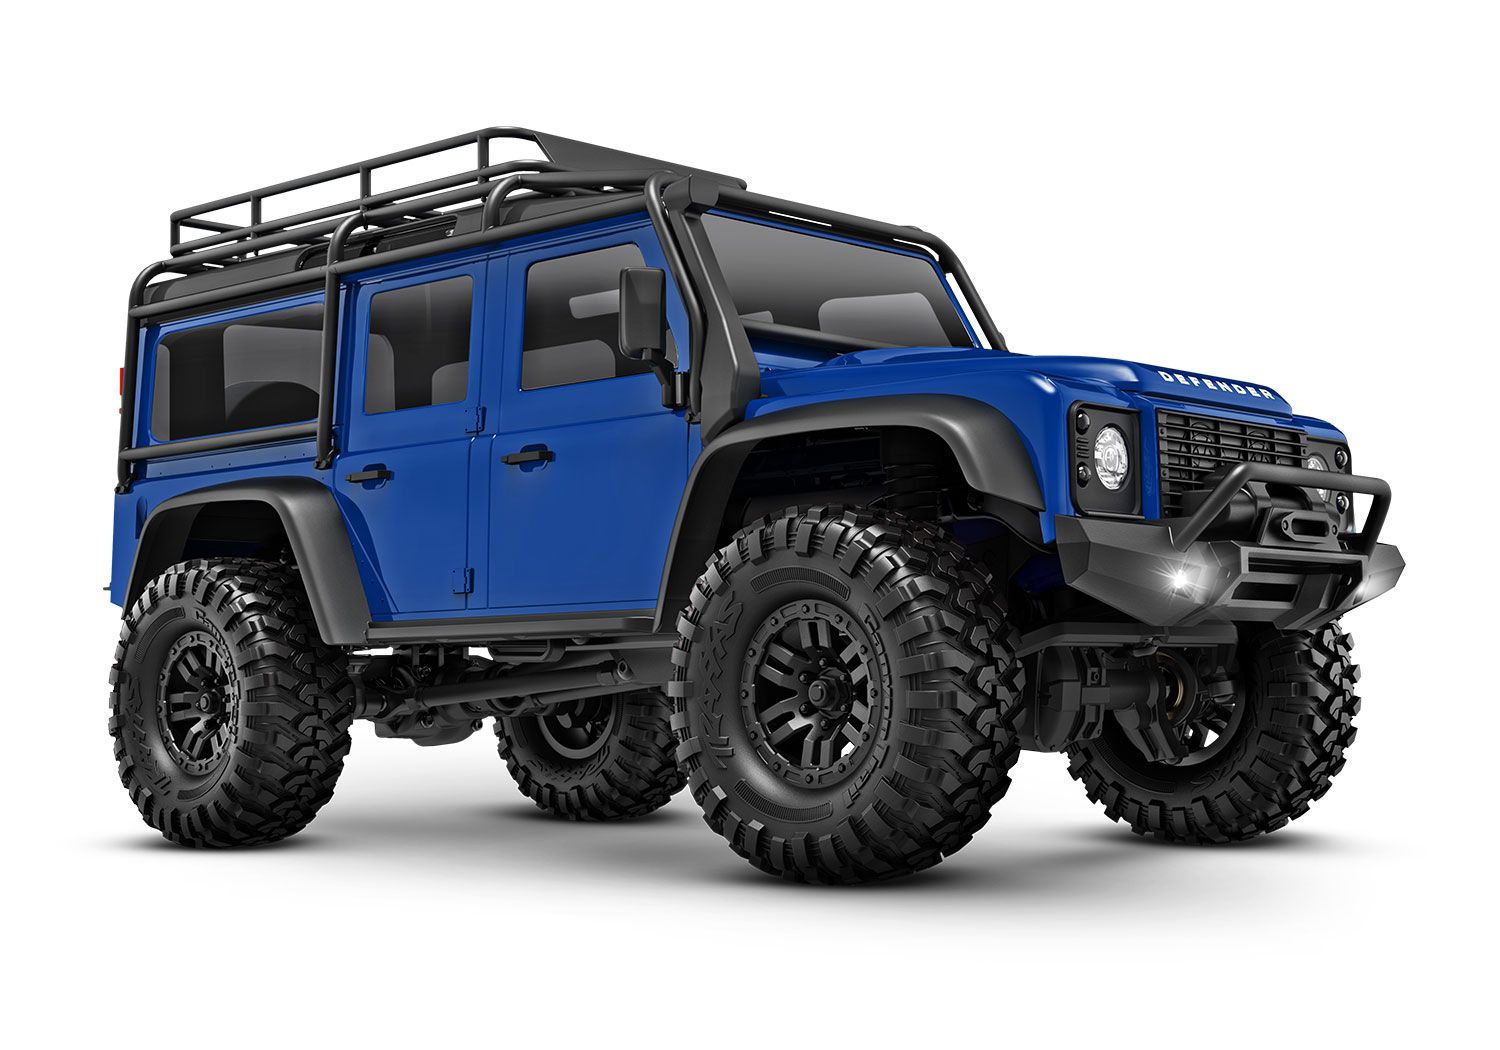 TRX-4M Defender Traxxas 97054-1 This item is only available for in-store pick-up and cannot be shipped.